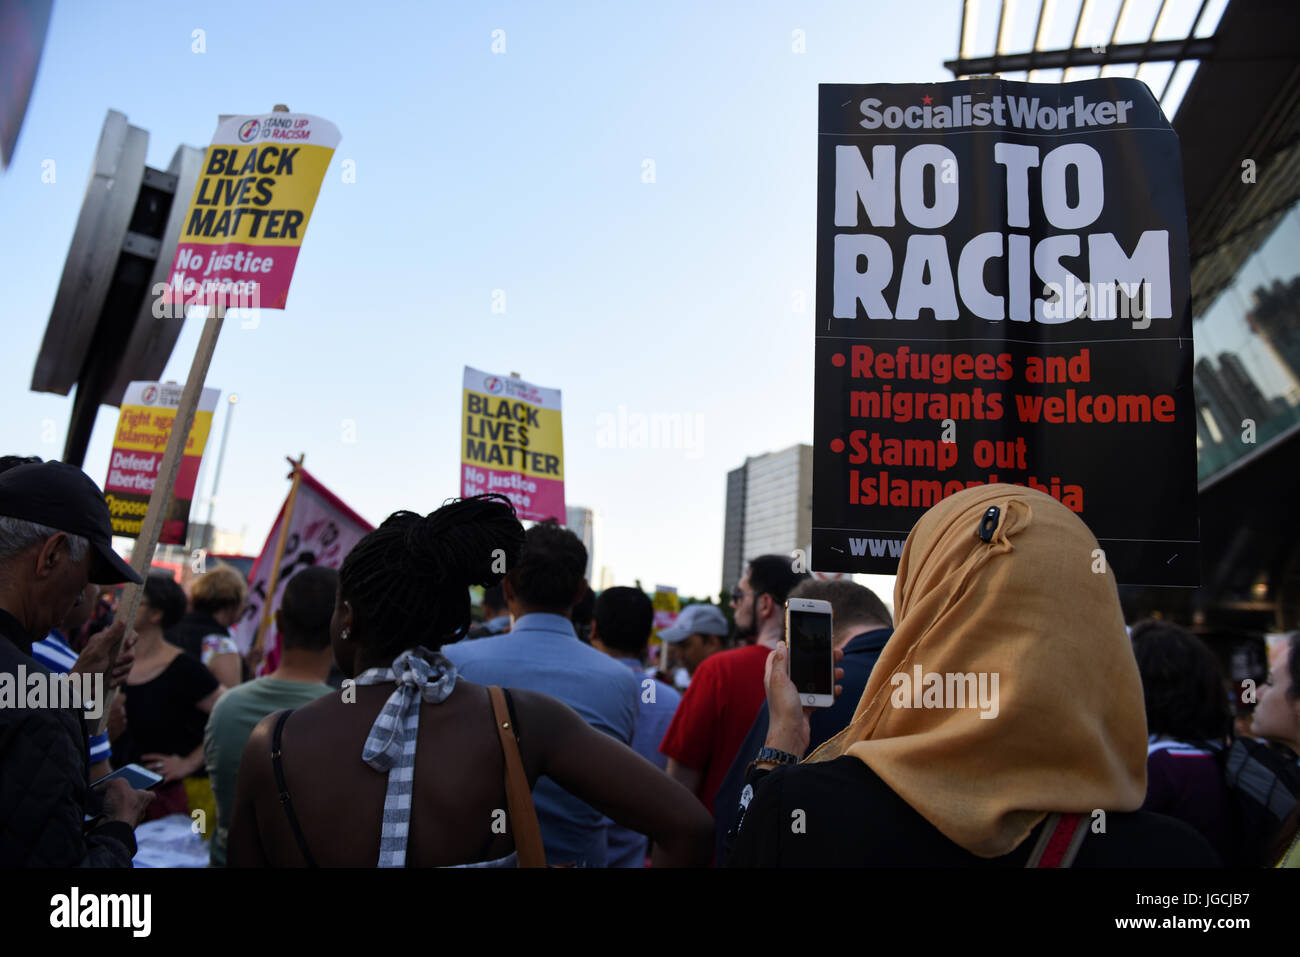 London, UK. 05th JUL 2017. 'STOP ACID ATTACKS' emergency protest outside the Stratford station in East London. Protesters gathered to protest against the recent acid attacks and increasing Islamophobia. People are holding placards reading 'No To Racism' and 'Black Lives Matter'. Credit: ZEN - Zaneta Razaite / Alamy Live News Stock Photo